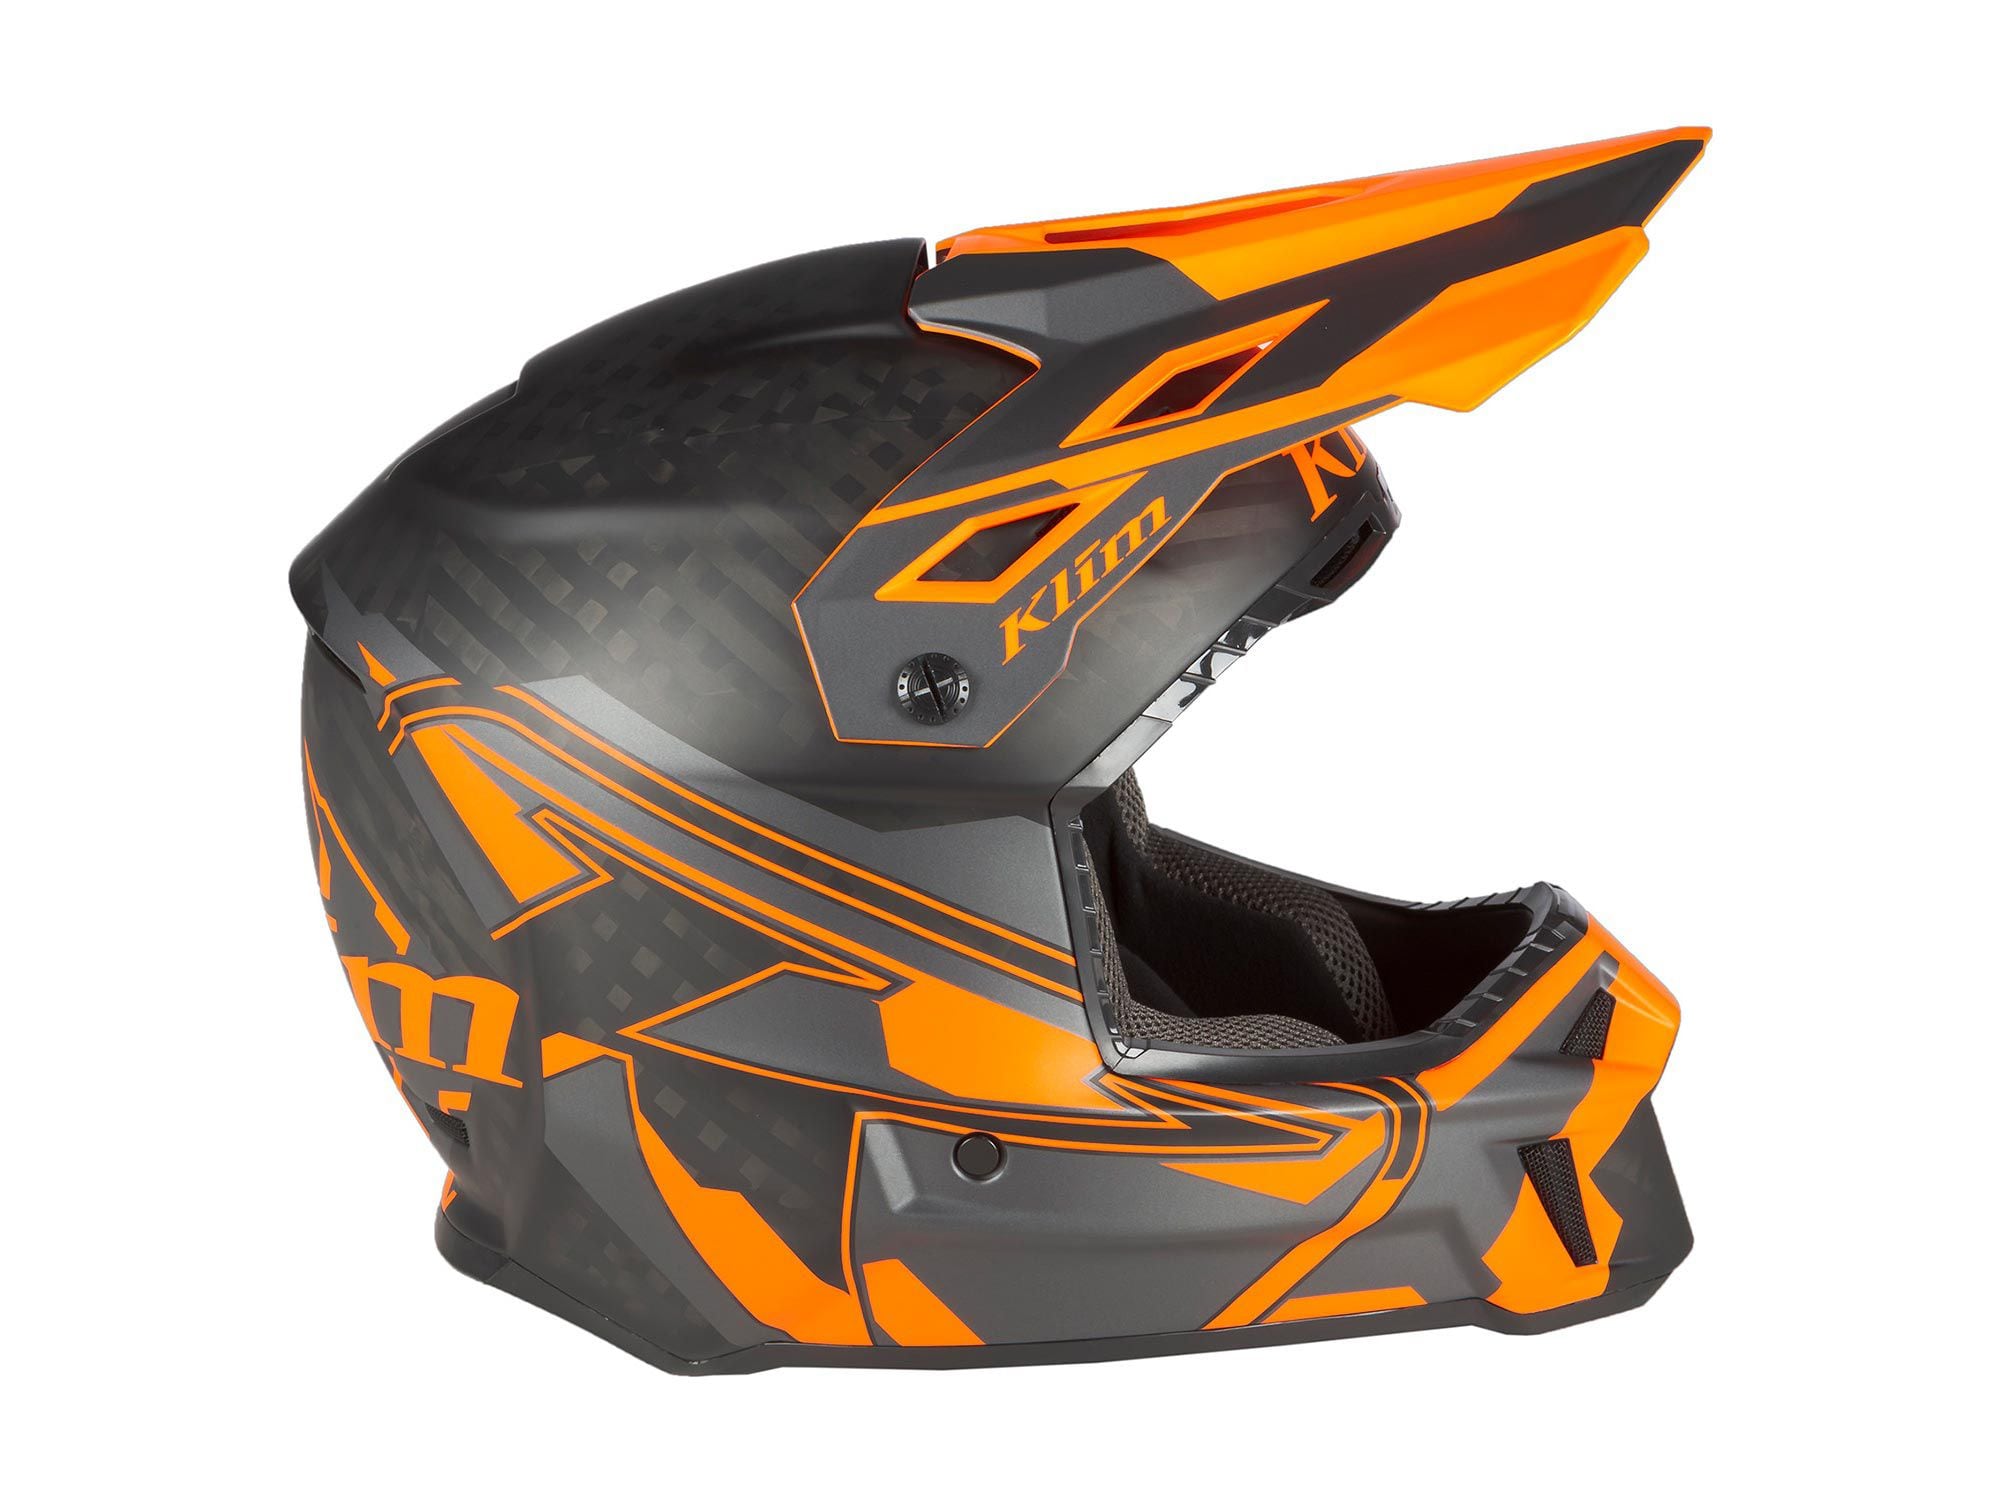 The Ascent Asphalt/Strike Orange will make you stand out in the woods.